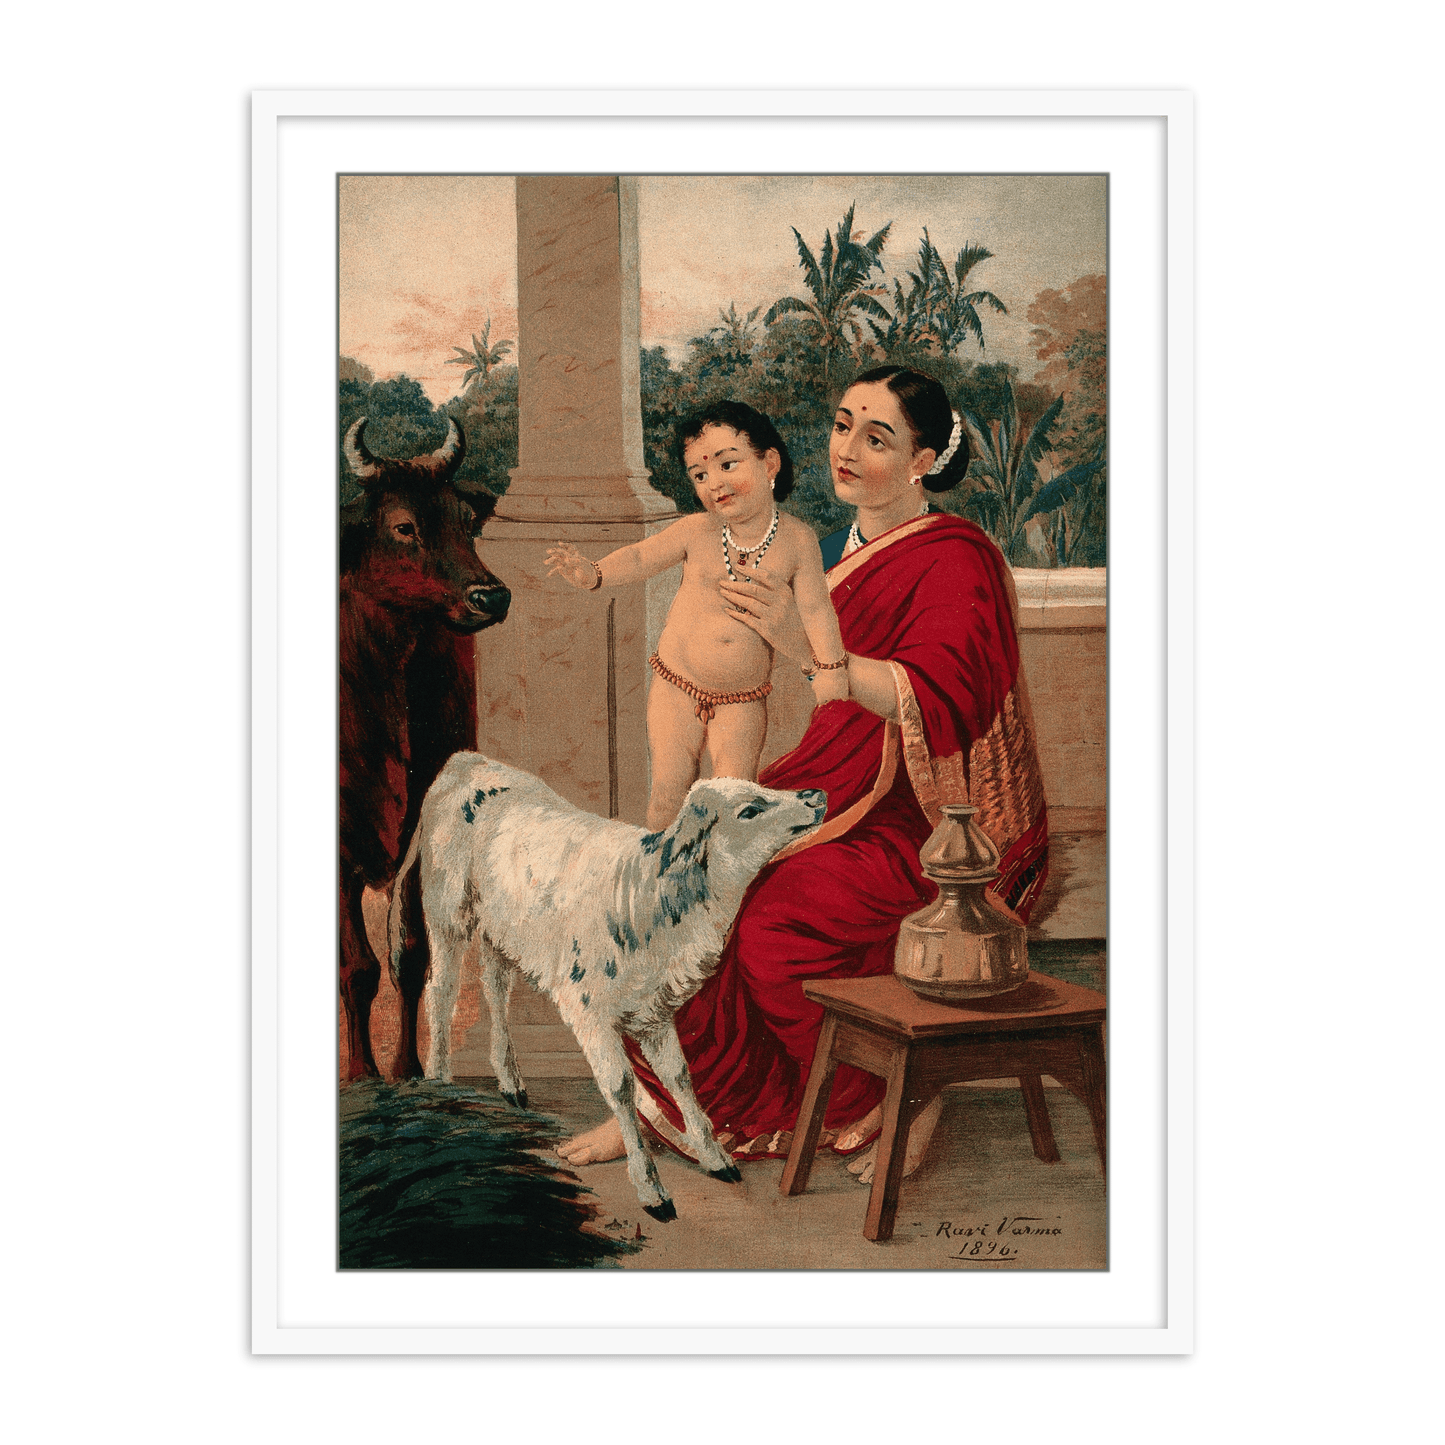 Krishna as an infant on Yasoda's lap playing with a cow and a calf by Raja Ravi Varma Wall Art